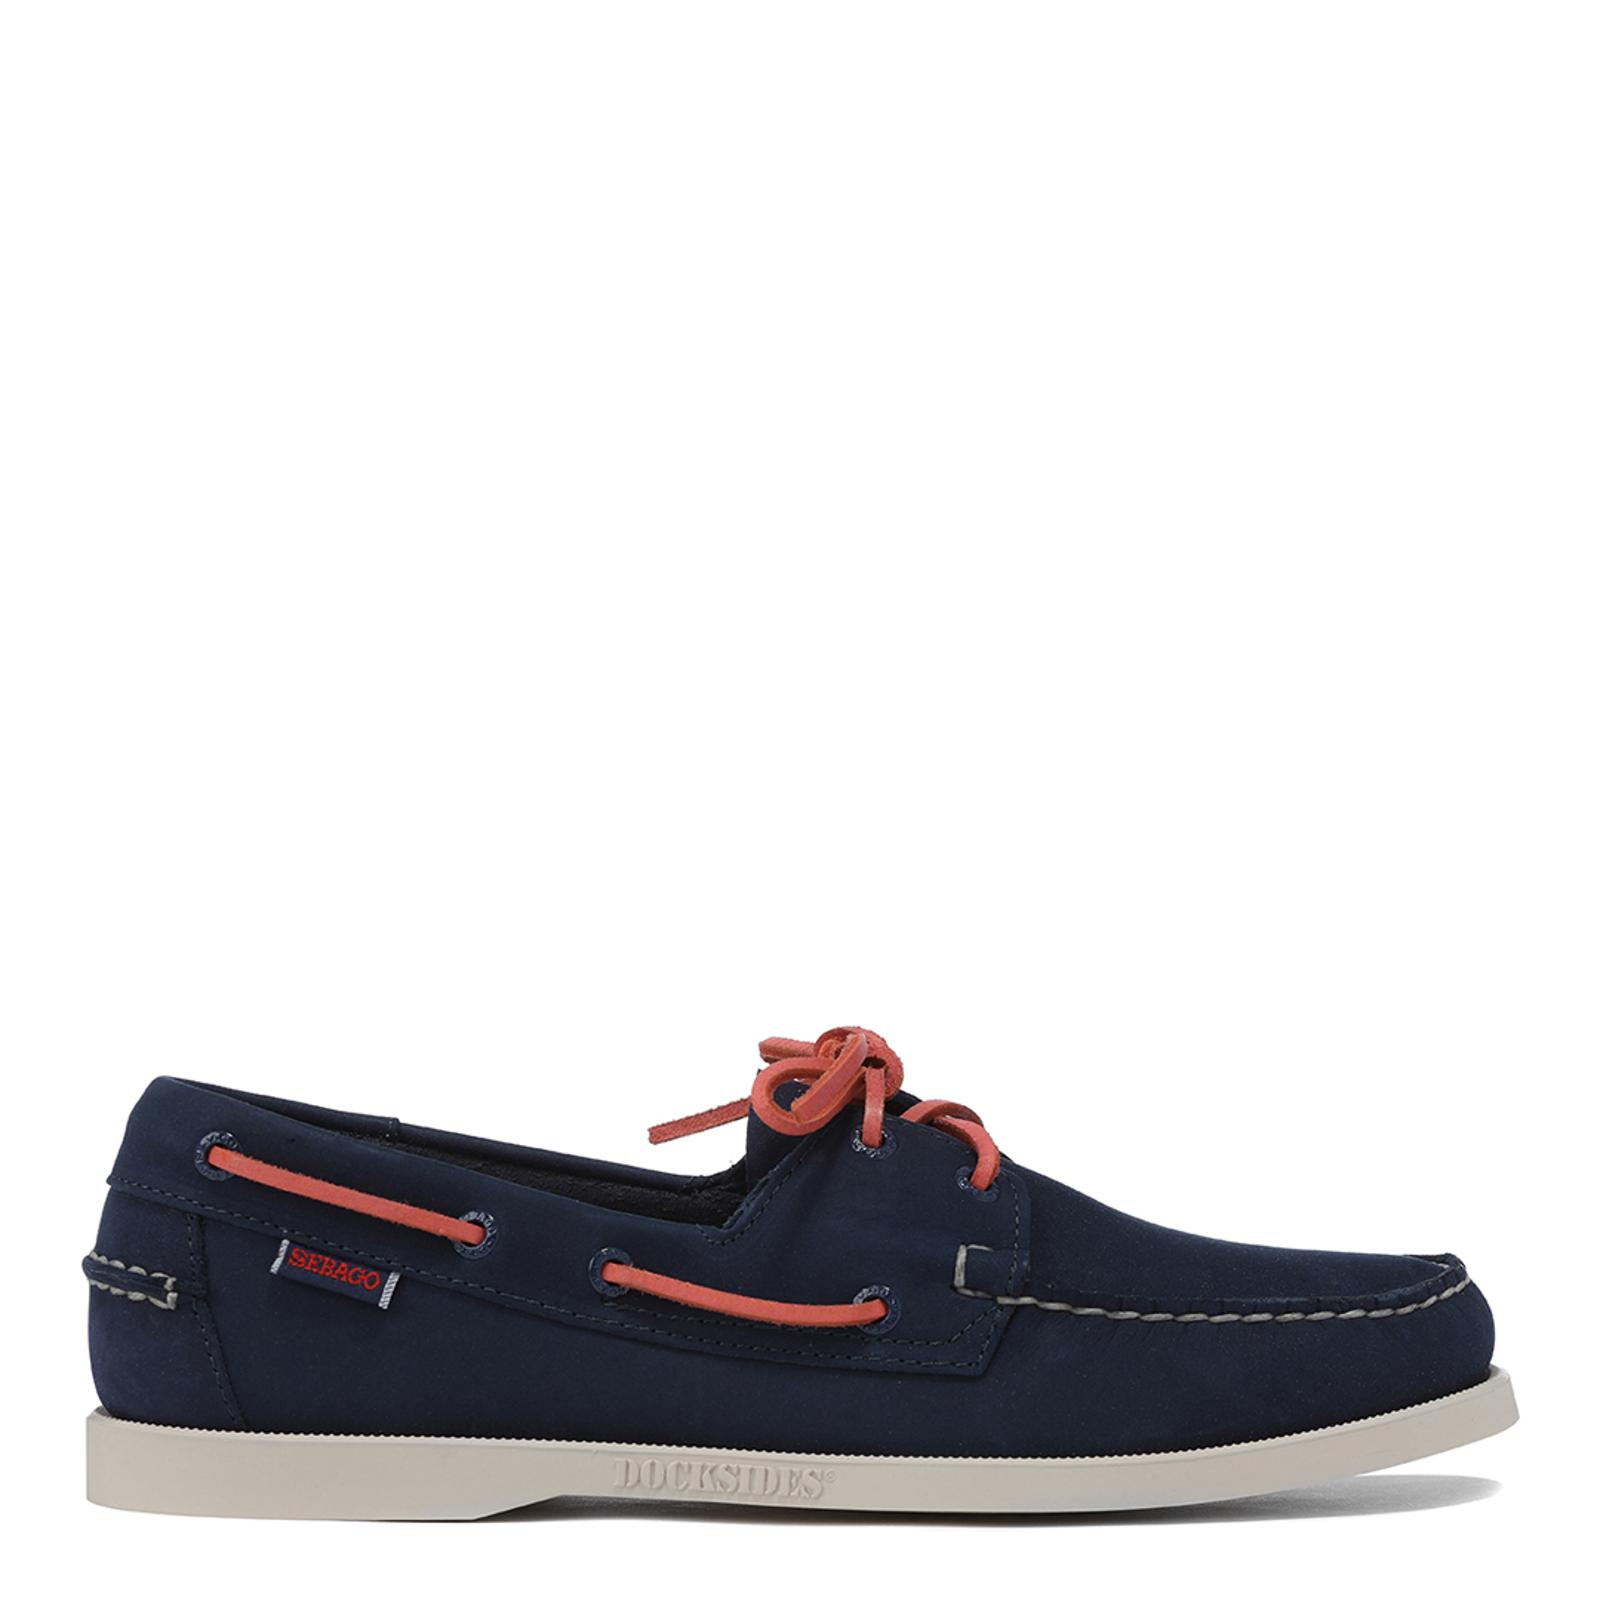 Men's Navy and Coral Suede Dockside Boat Shoes - BrandAlley